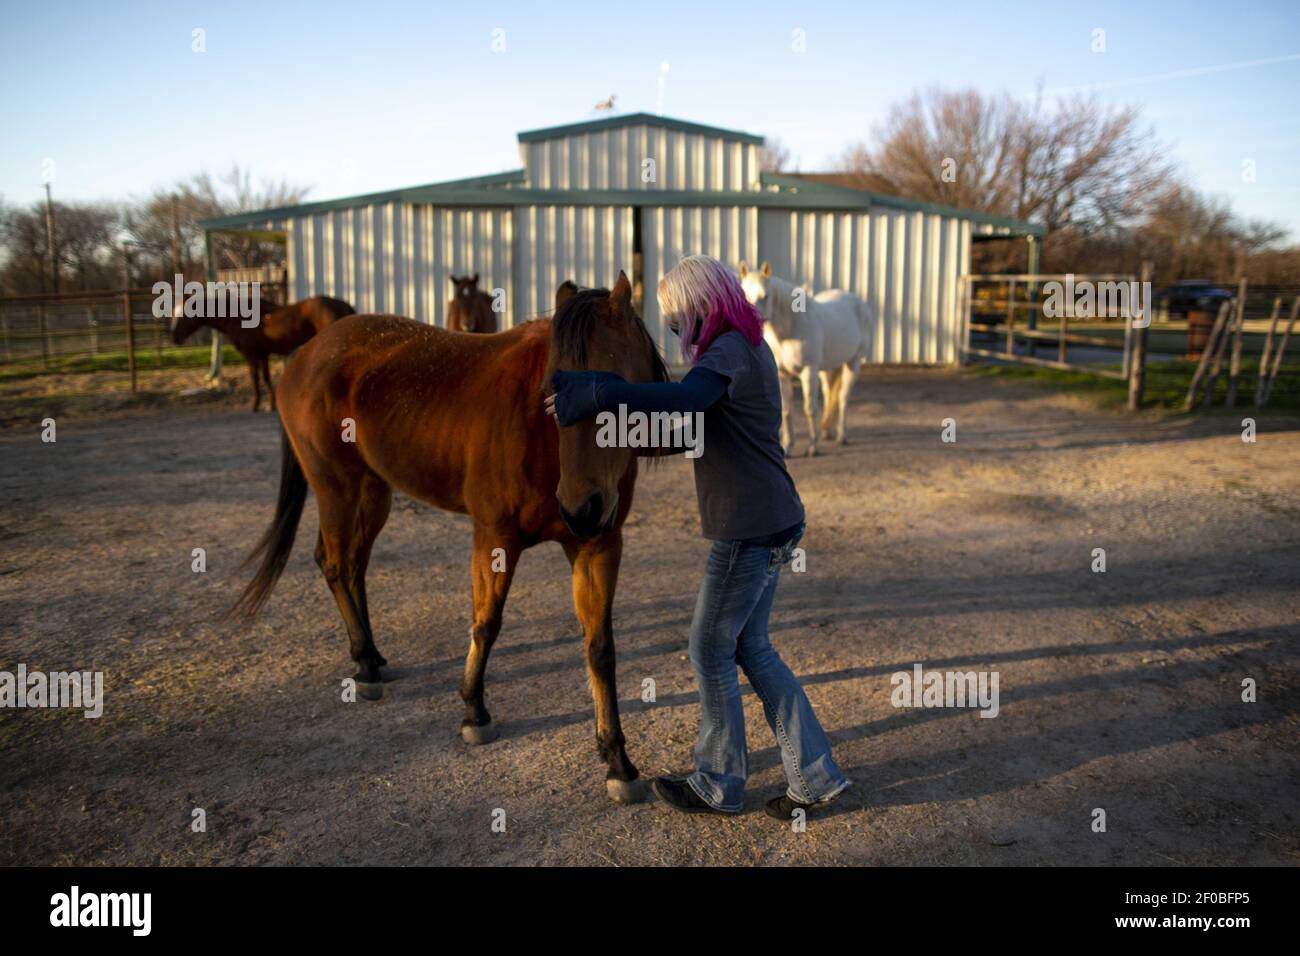 Weatherford, Texas, USA. 6th Mar, 2021. Laura's horse greets her and the stable doors as she makes her way to check their water levels in a 100-gallon barrel. During the snowstorm, Laura and her husband had to use an ax to free the water from ice so the horses could drink.As the snow has melted in Texas after the random winter storm that left millions without water and power, many Texans are still recovering from the damages. From Weatherford, Texas, Laura shares her experience of what it was like for her and her husband during the storm. Laura is a graphic designer that owns four Stock Photo